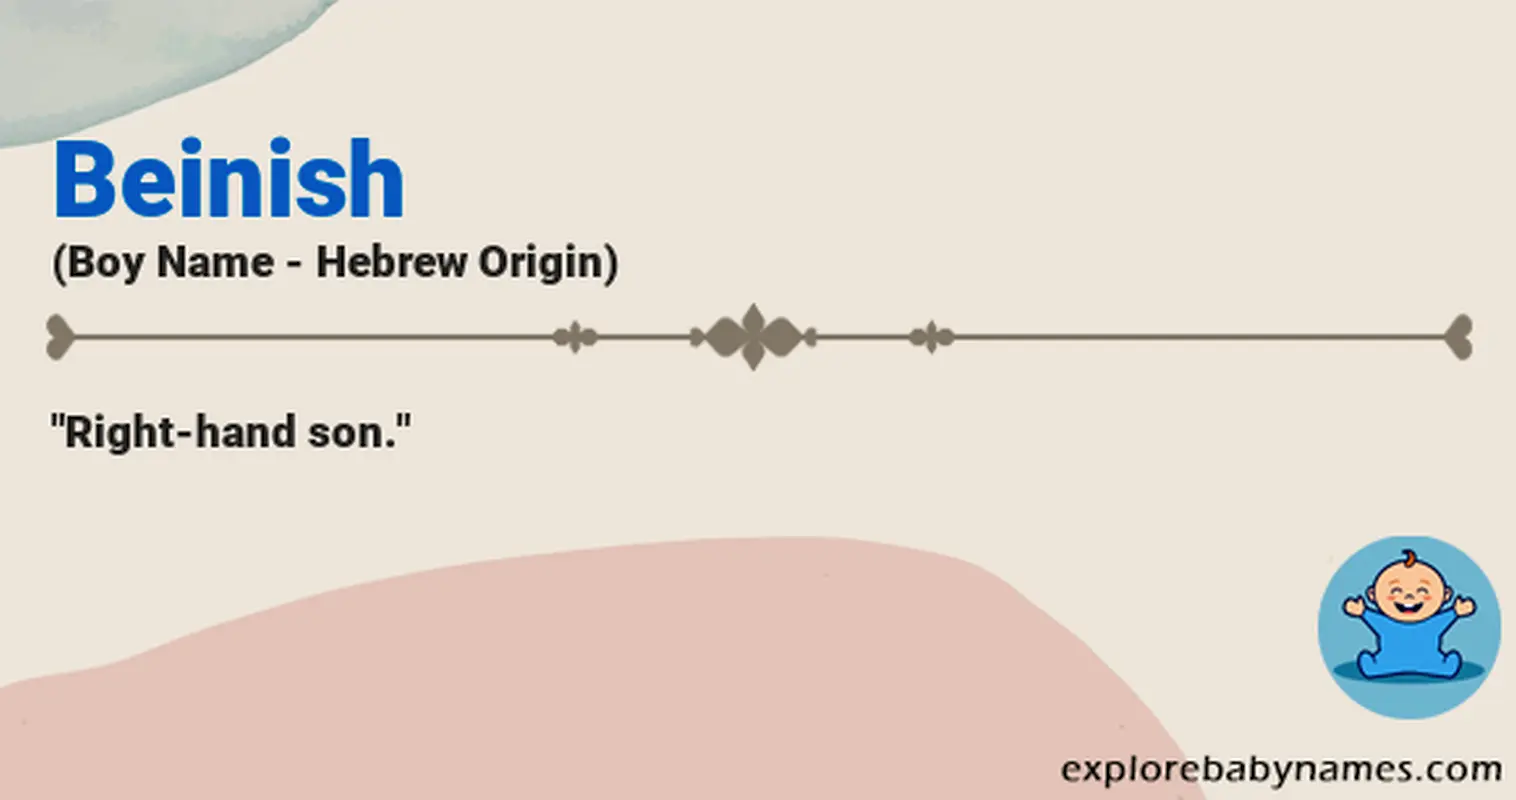 Meaning of Beinish